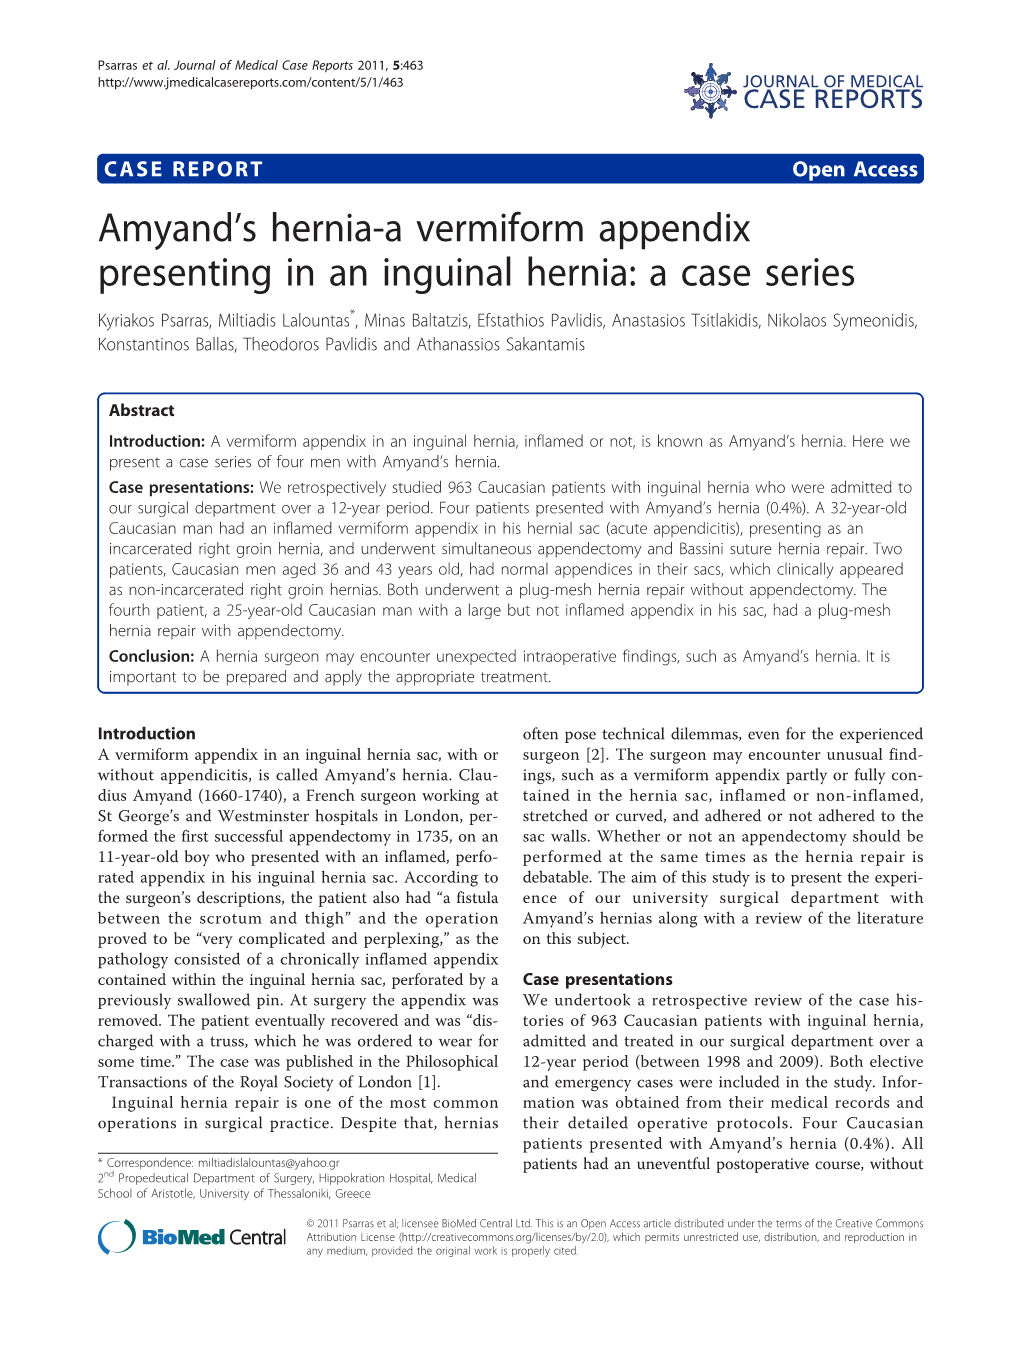 Amyandls Hernia-A Vermiform Appendix Presenting in an Inguinal